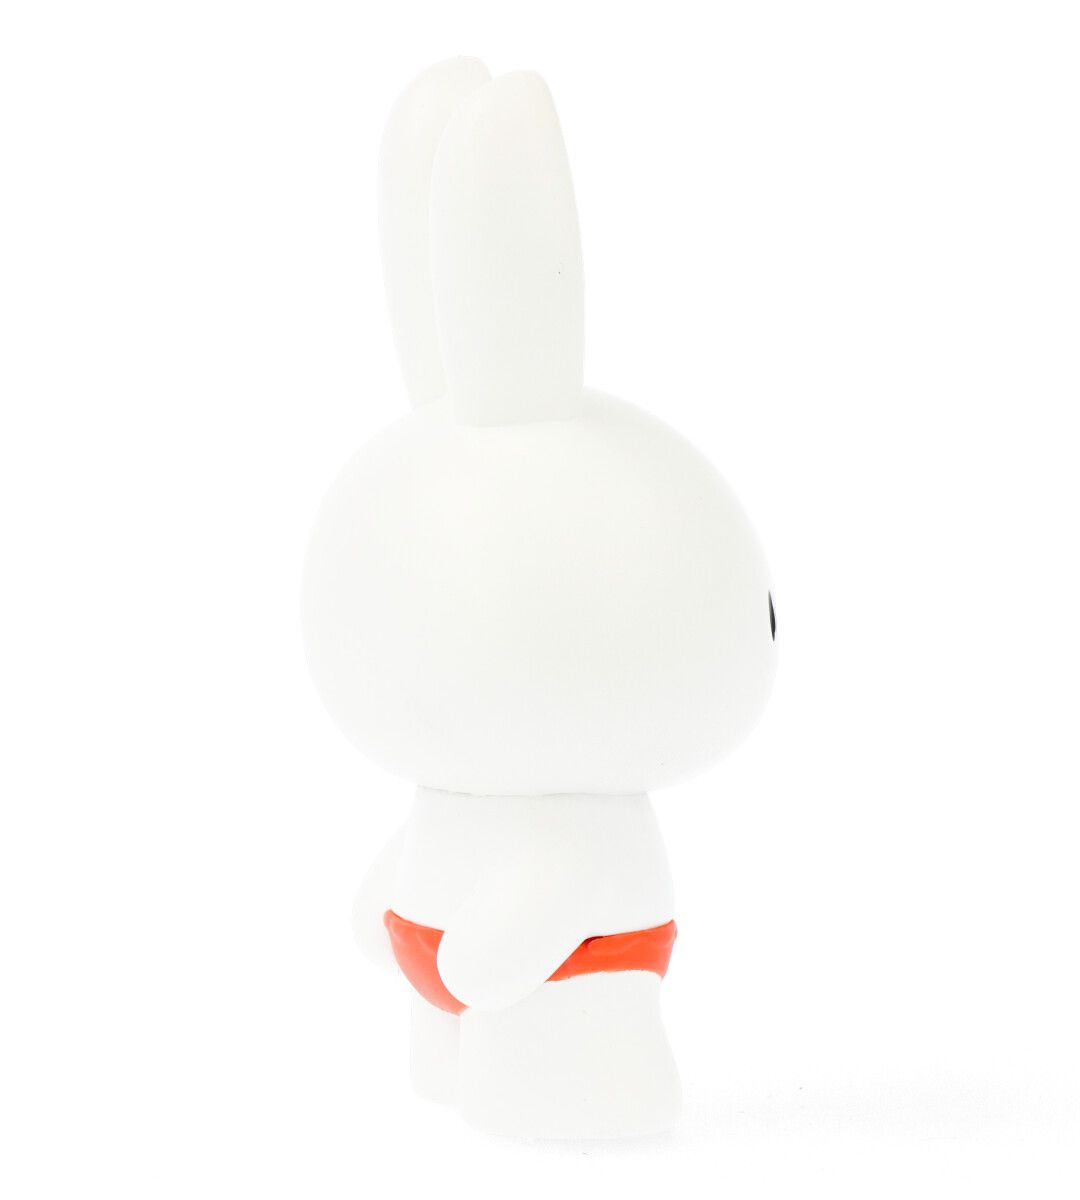 UDF Dick Bruna Series 3 - Miffy playing in water